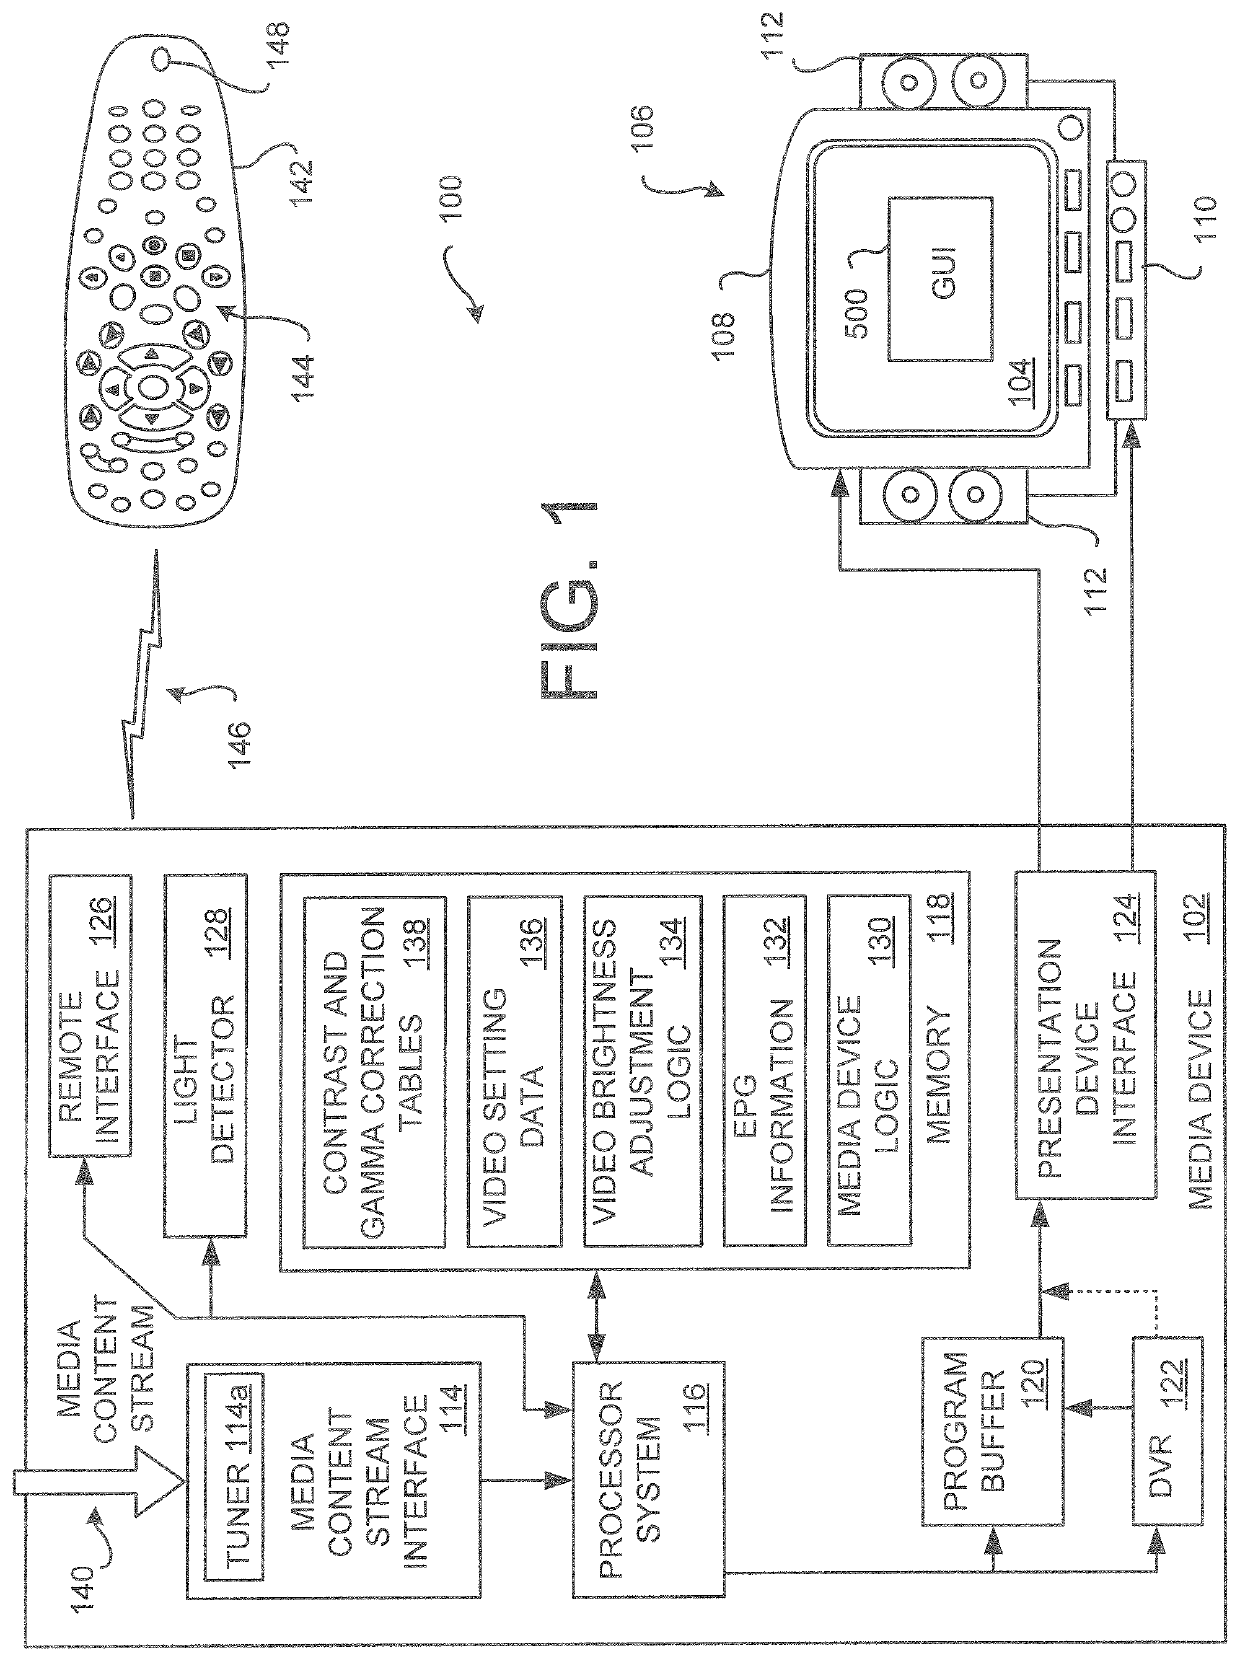 Apparatus, systems and methods for video output brightness adjustment